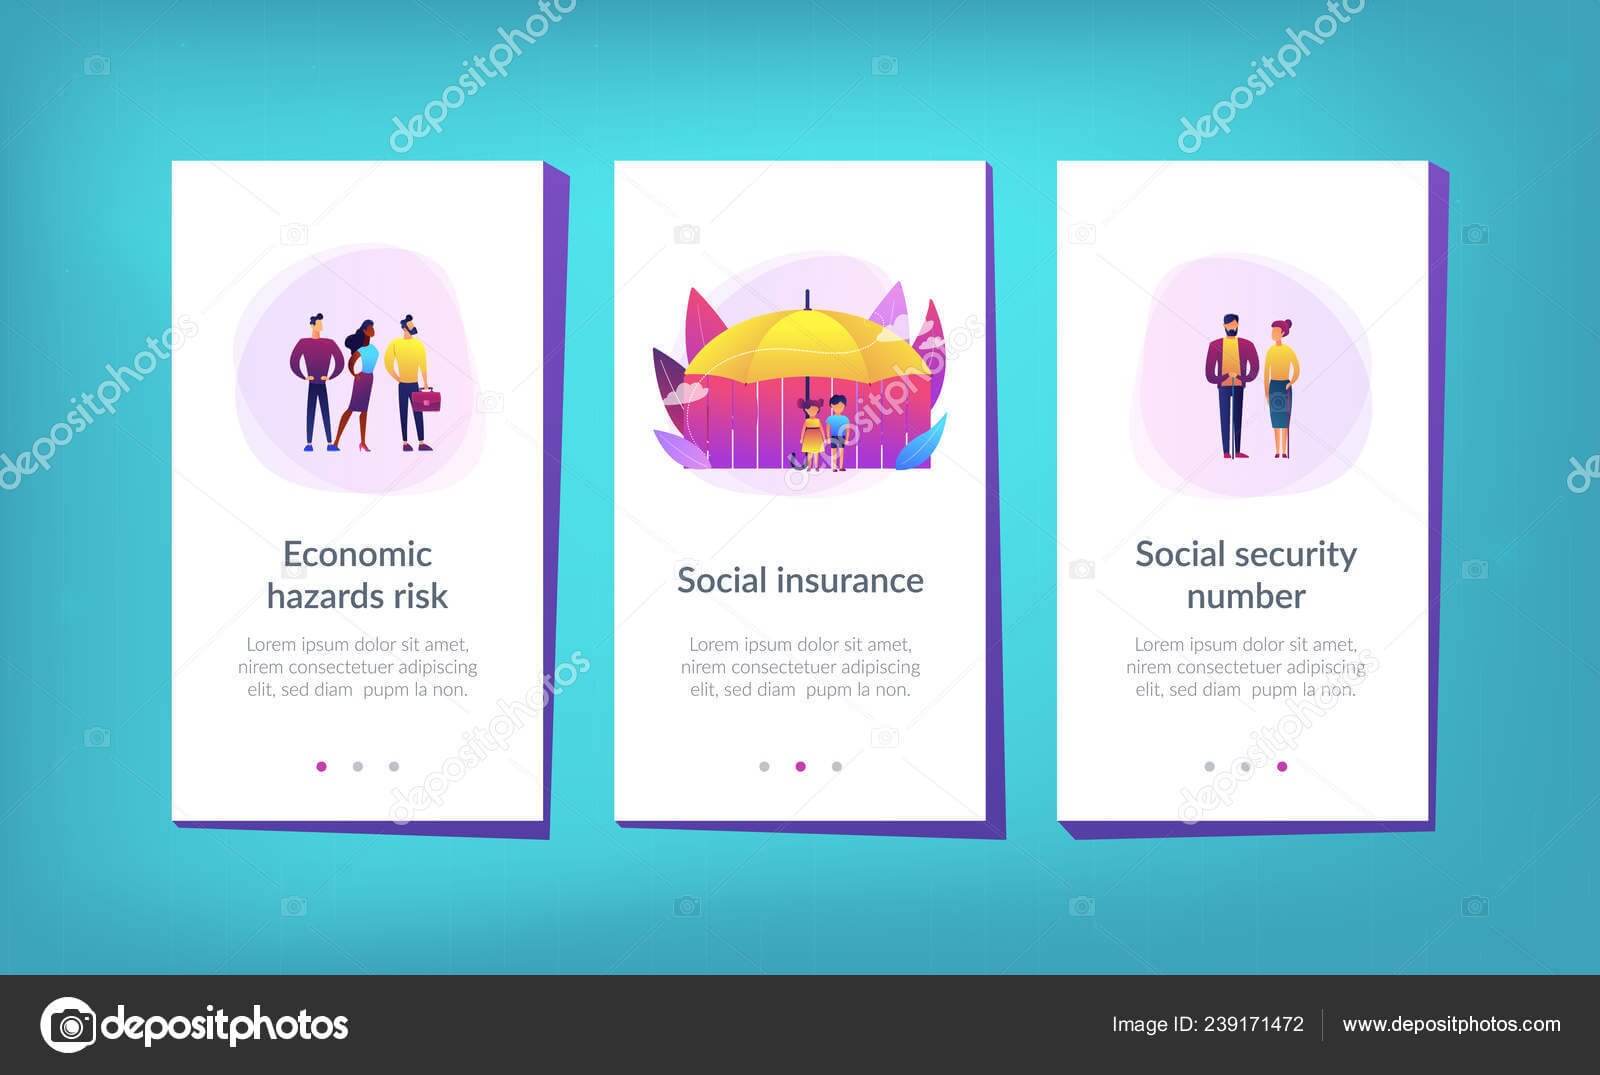 Blank Social Security Card Template | Social Insurance App Regarding Social Security Card Template Download